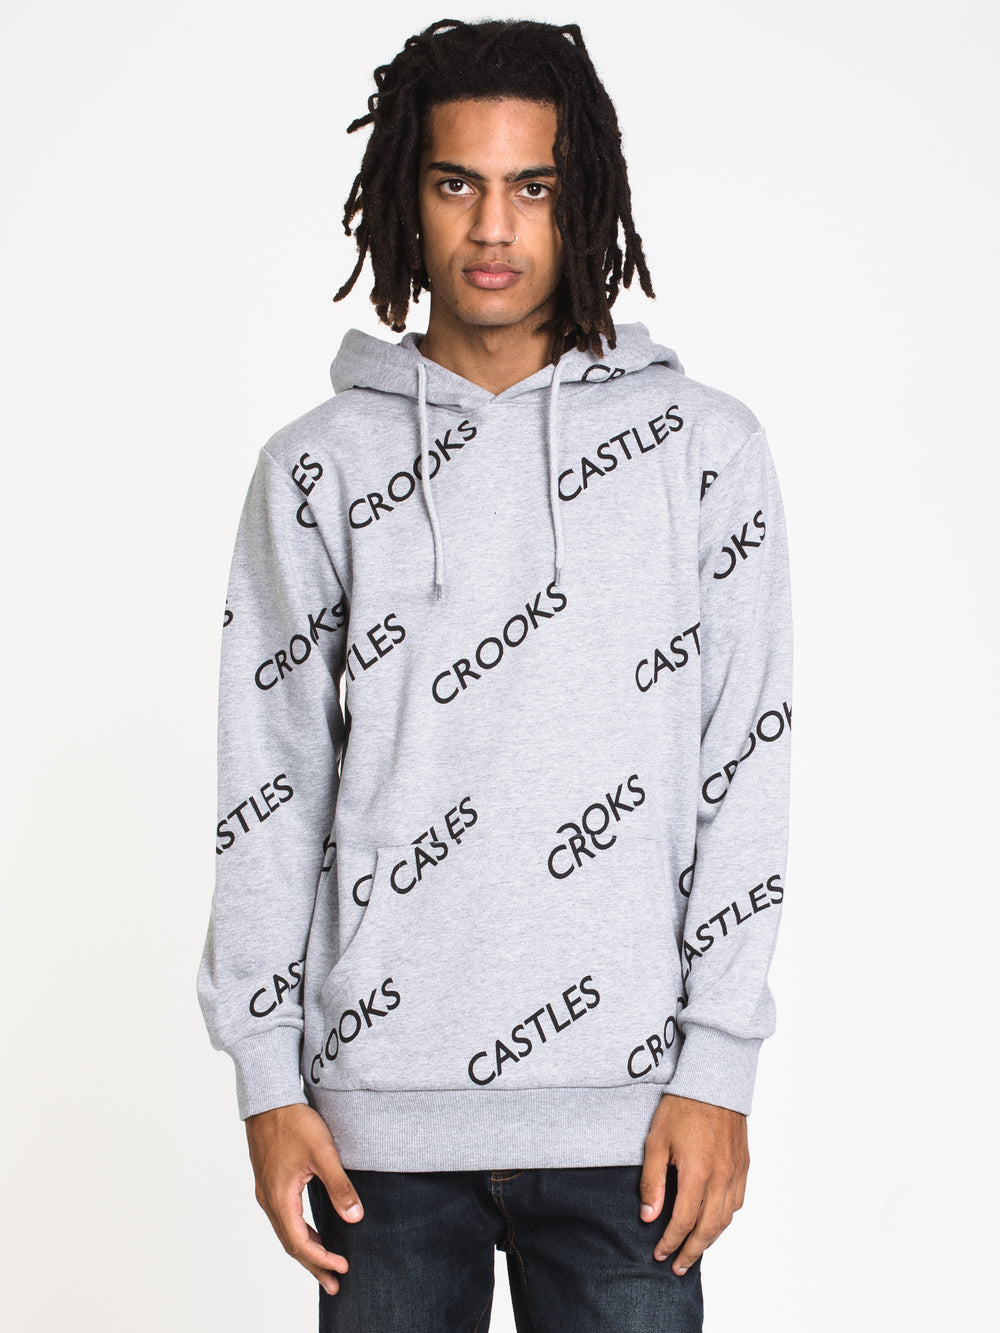 CROOKS & CASTLES NEW CORE LOGO PULLOVER HOODIE - CLEARANCE